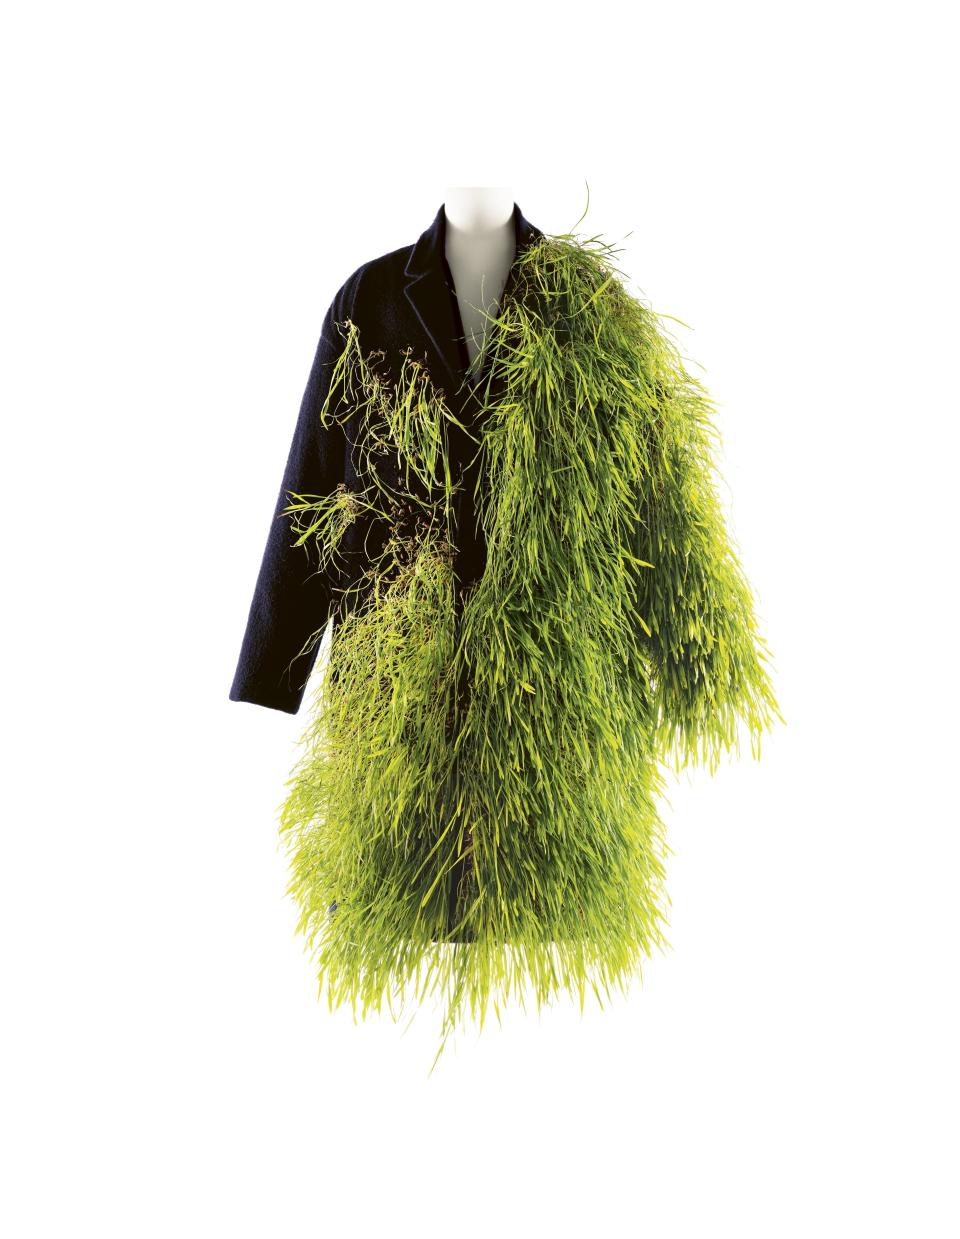 This image released by The Metropolitan Museum of Art shows a Jonathan Anderson for LOEWE coat. Anderson is one of many designers whose work will be included in The Costume Institute's 2024 exhibition, "Sleeping Beauties: Reawakening Fashion," on view from May 10 through Sept. 2, 2024. (Nick Knight/The Metropolitan Museum of Art via AP)